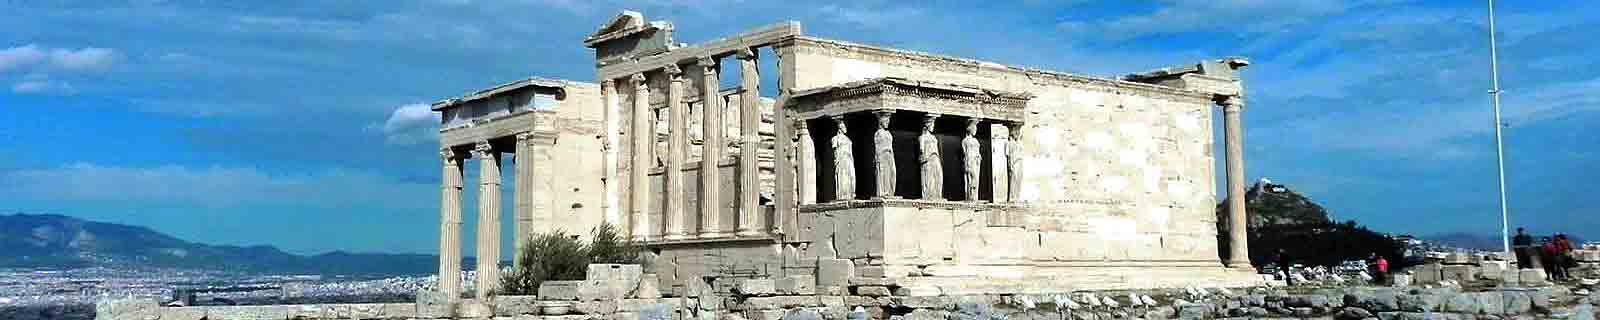 Photo by IQCruising of the Erechtheion in the the Acroplis of Athens a top highlight of Piraeus cruise port